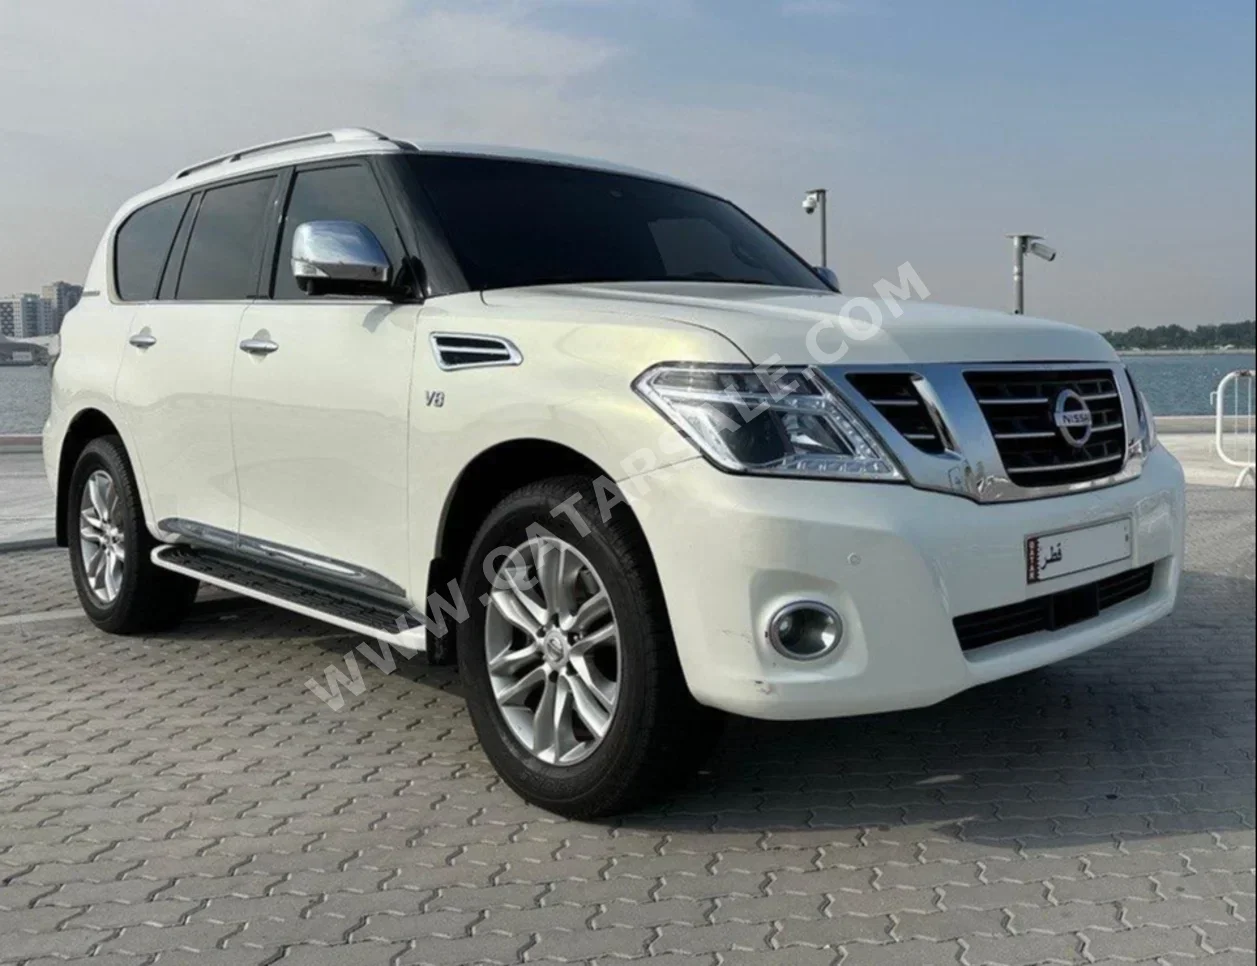 Nissan  Patrol  LE  2012  Automatic  236,000 Km  8 Cylinder  Four Wheel Drive (4WD)  SUV  White